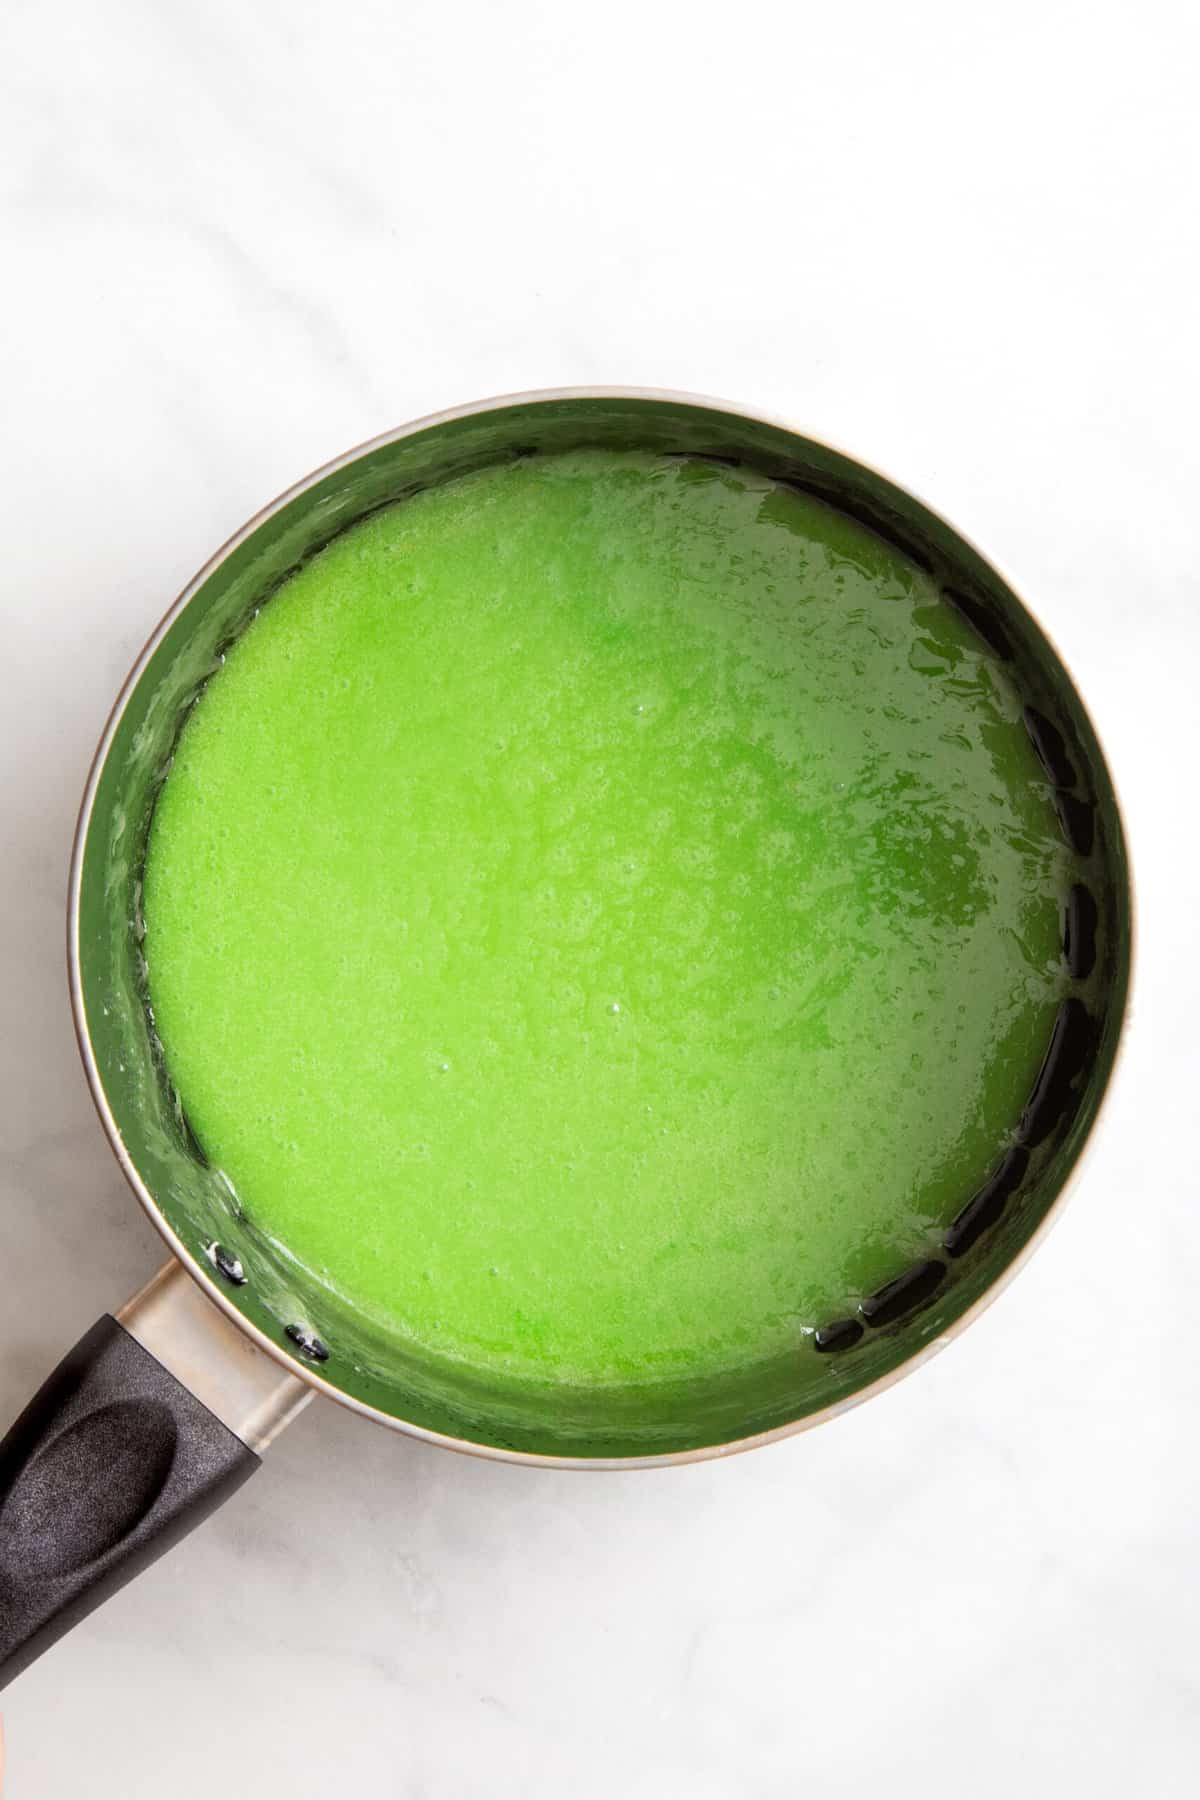 green food coloring with melted butter and marshmallows in a sauce pan. 